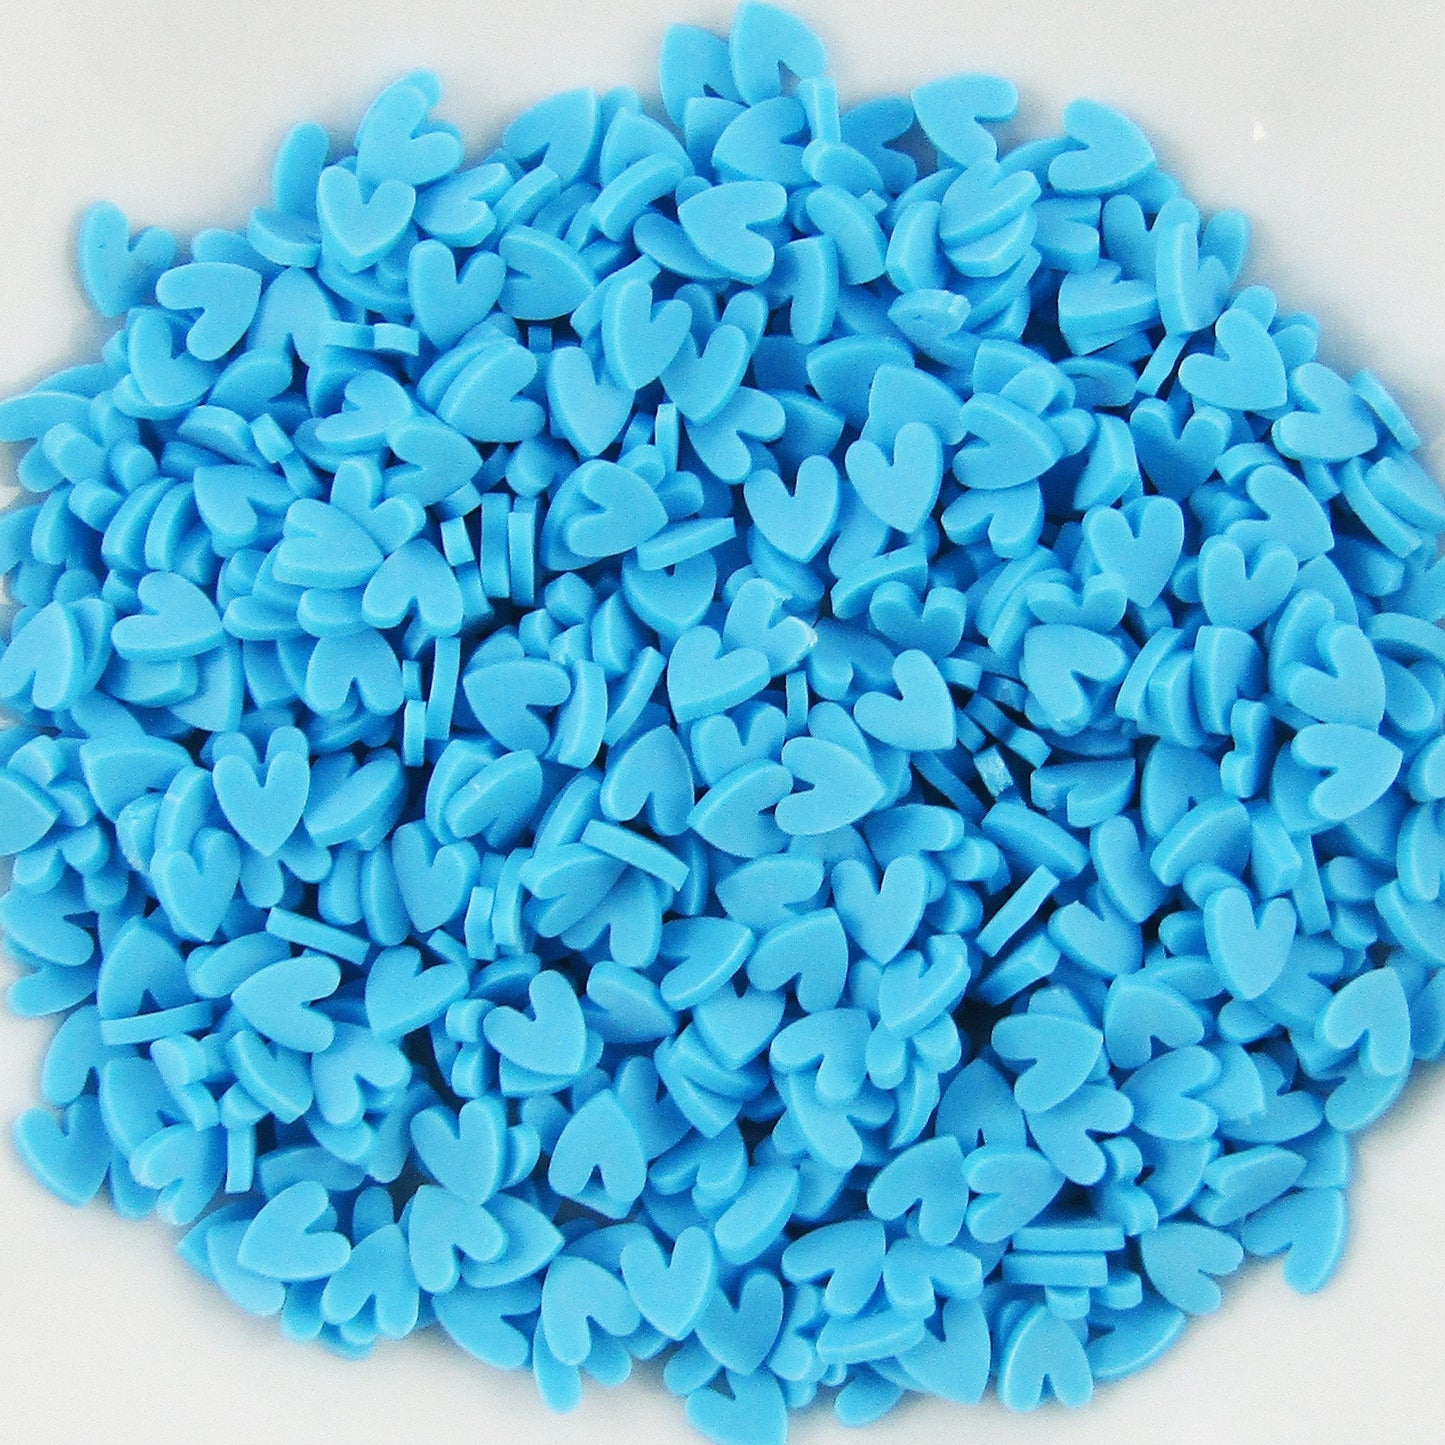 20g Polymer Clay Wafer Confetti Sprinkles Tiny Heart Blue Resin Shaker Cards etc